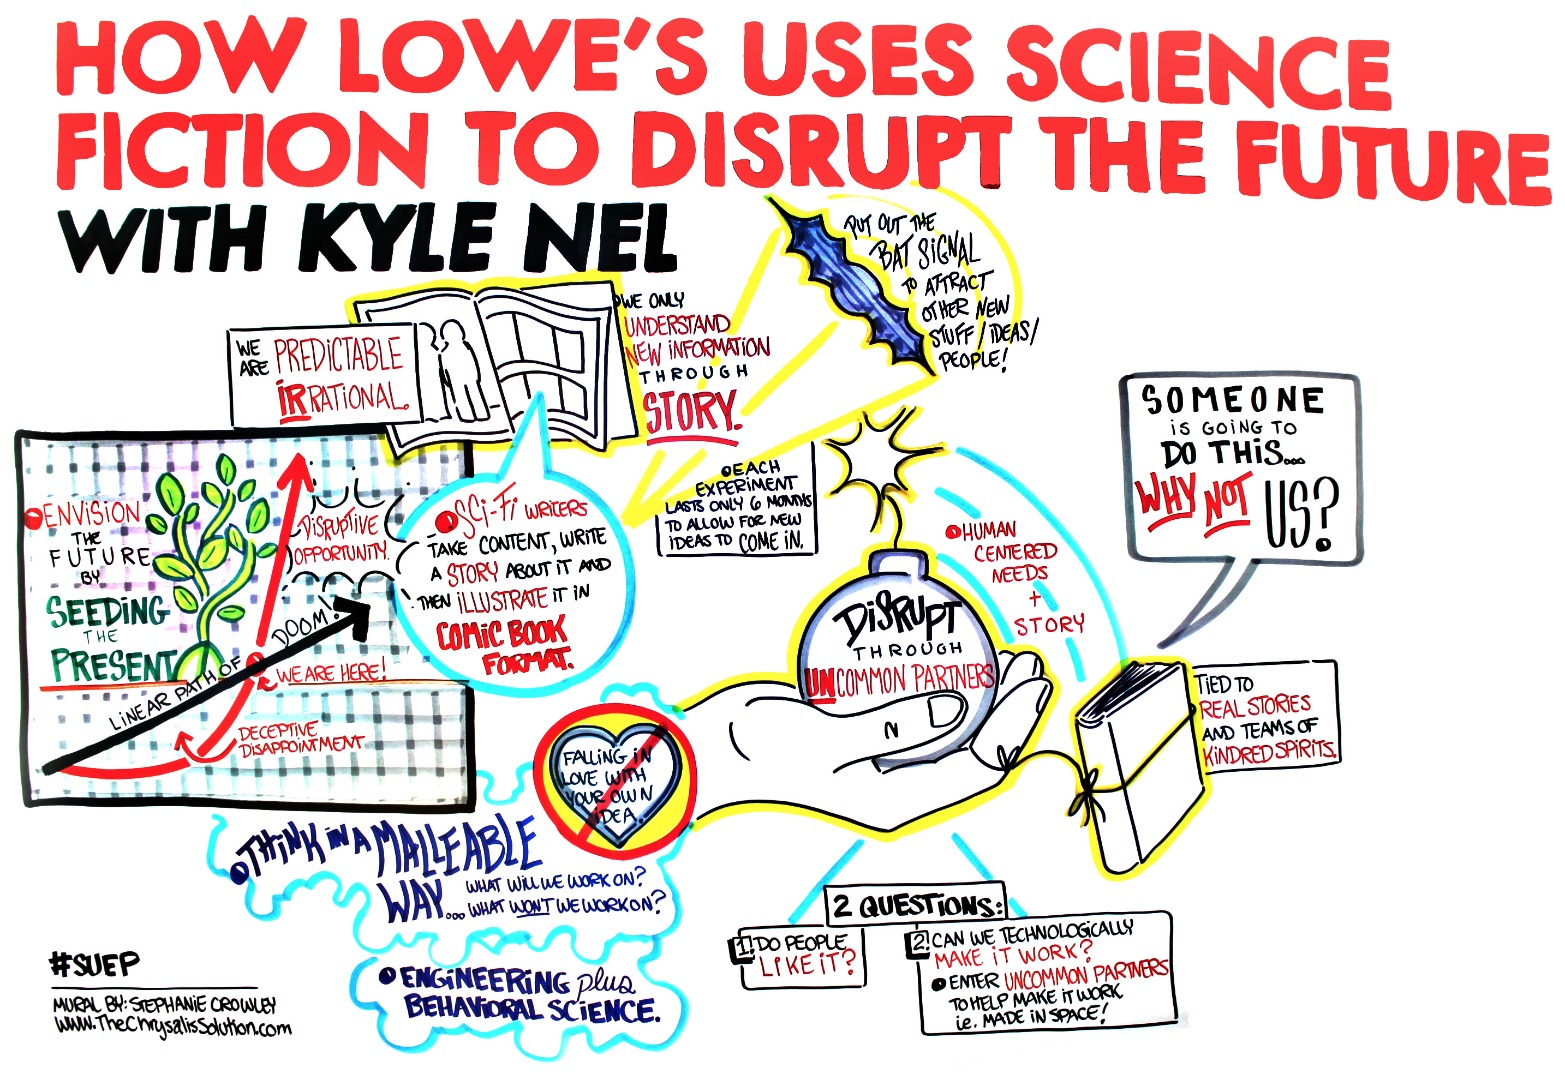 How Lowe's uses science fiction to disrupt the future